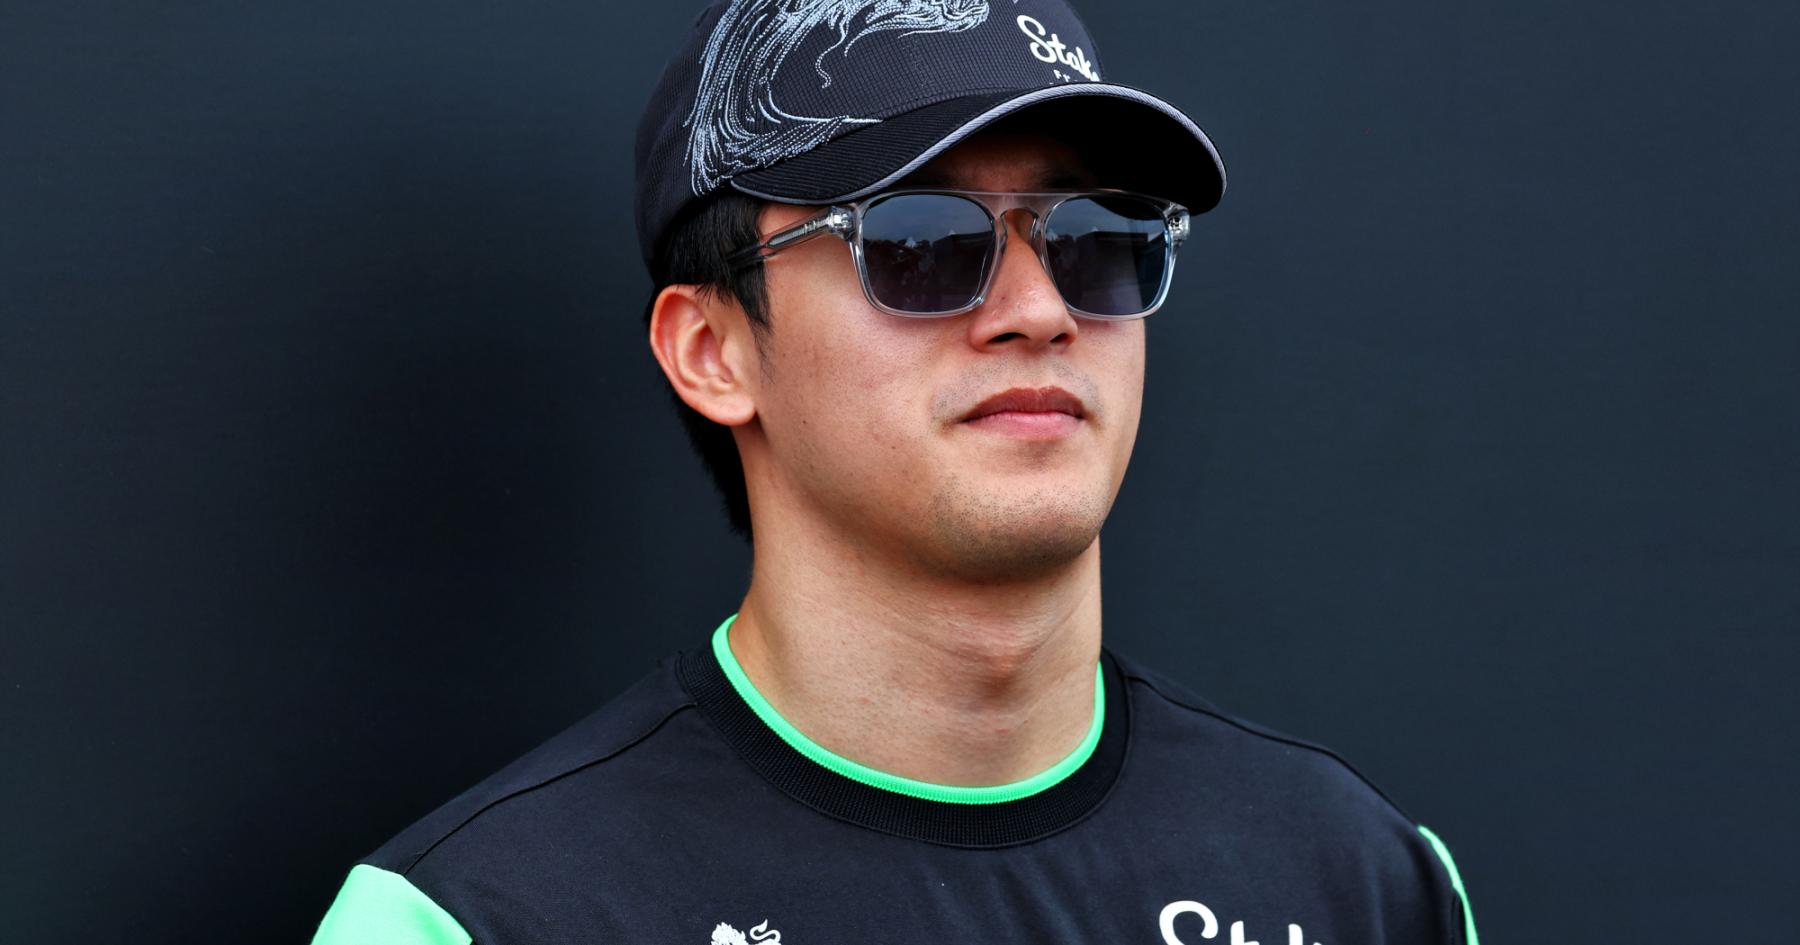 Racing Against Time: Zhou's Quest to Secure 2025 F1 Seat